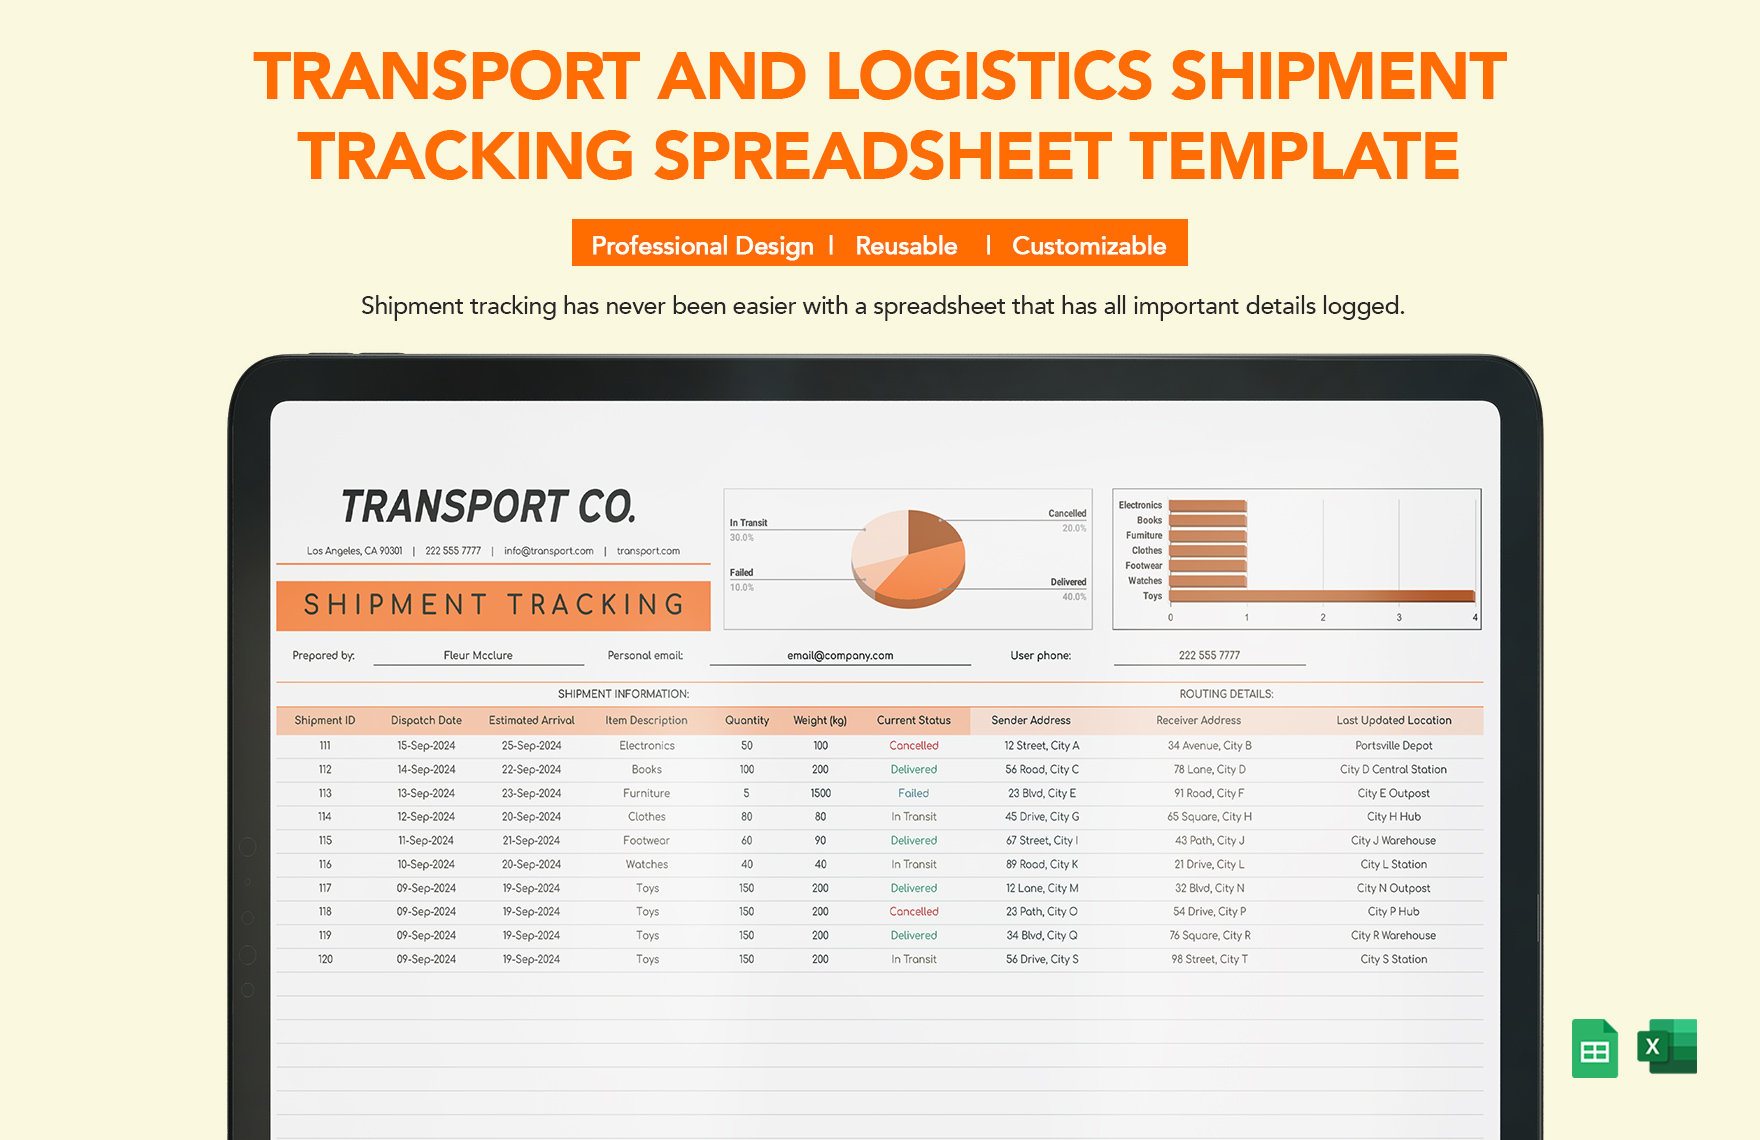 Free Transport and Logistics Shipment Tracking Spreadsheet Template